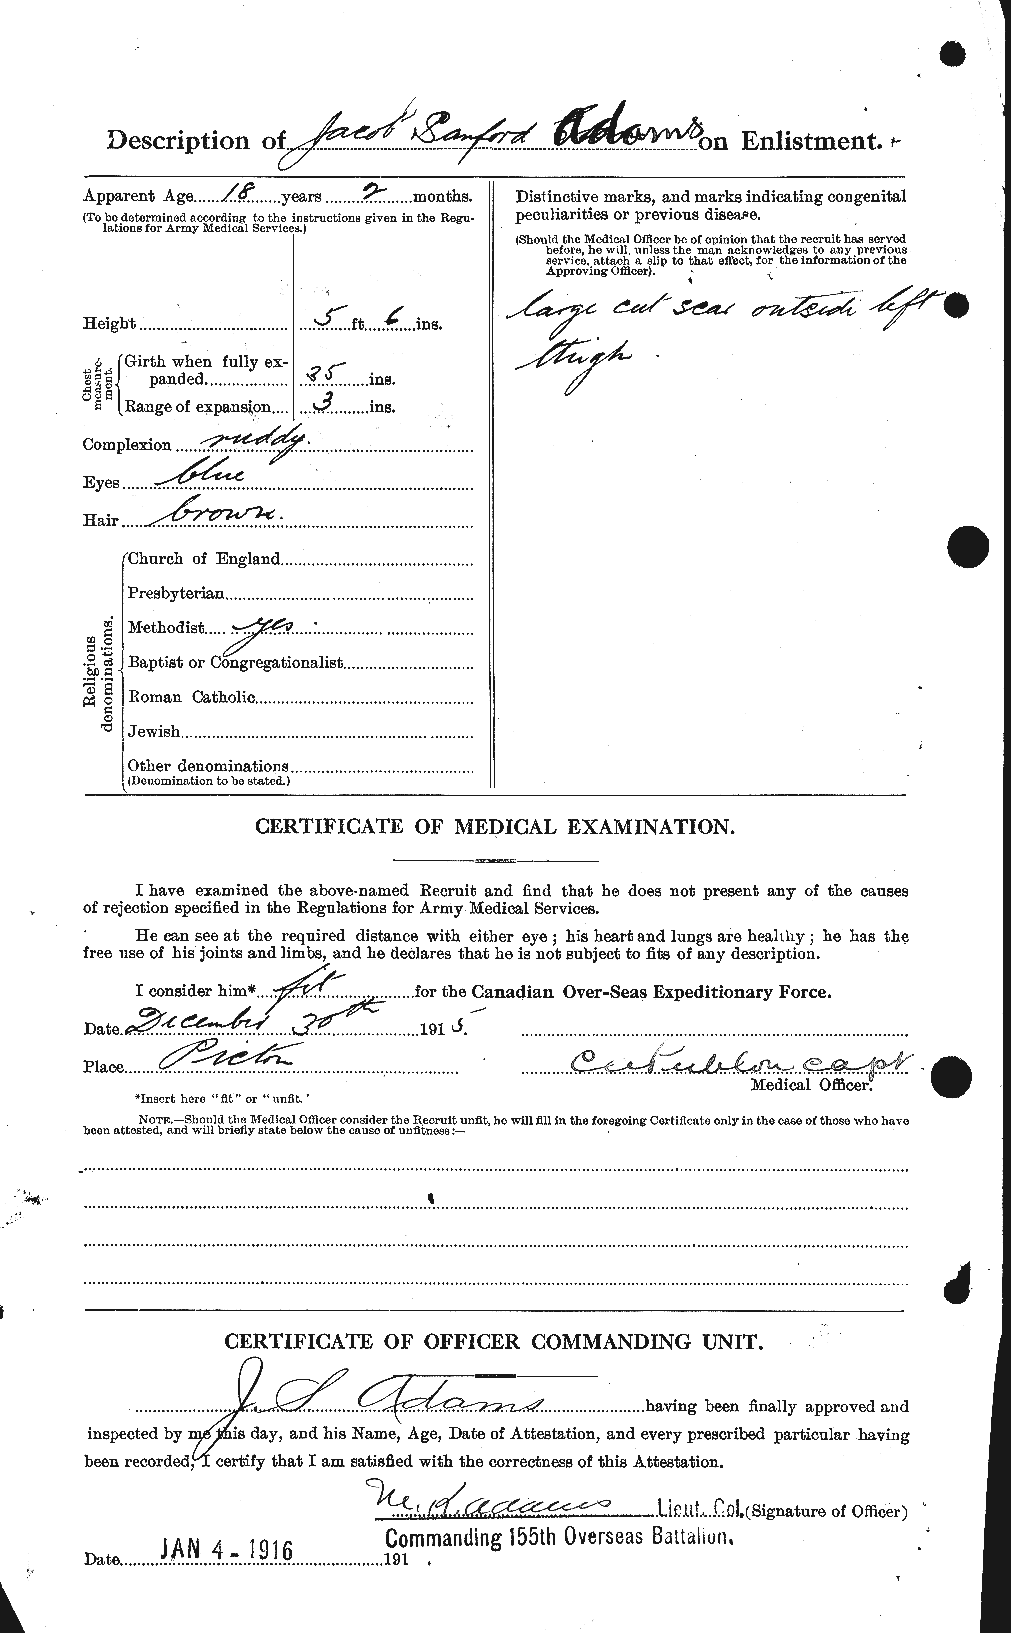 Personnel Records of the First World War - CEF 203221b